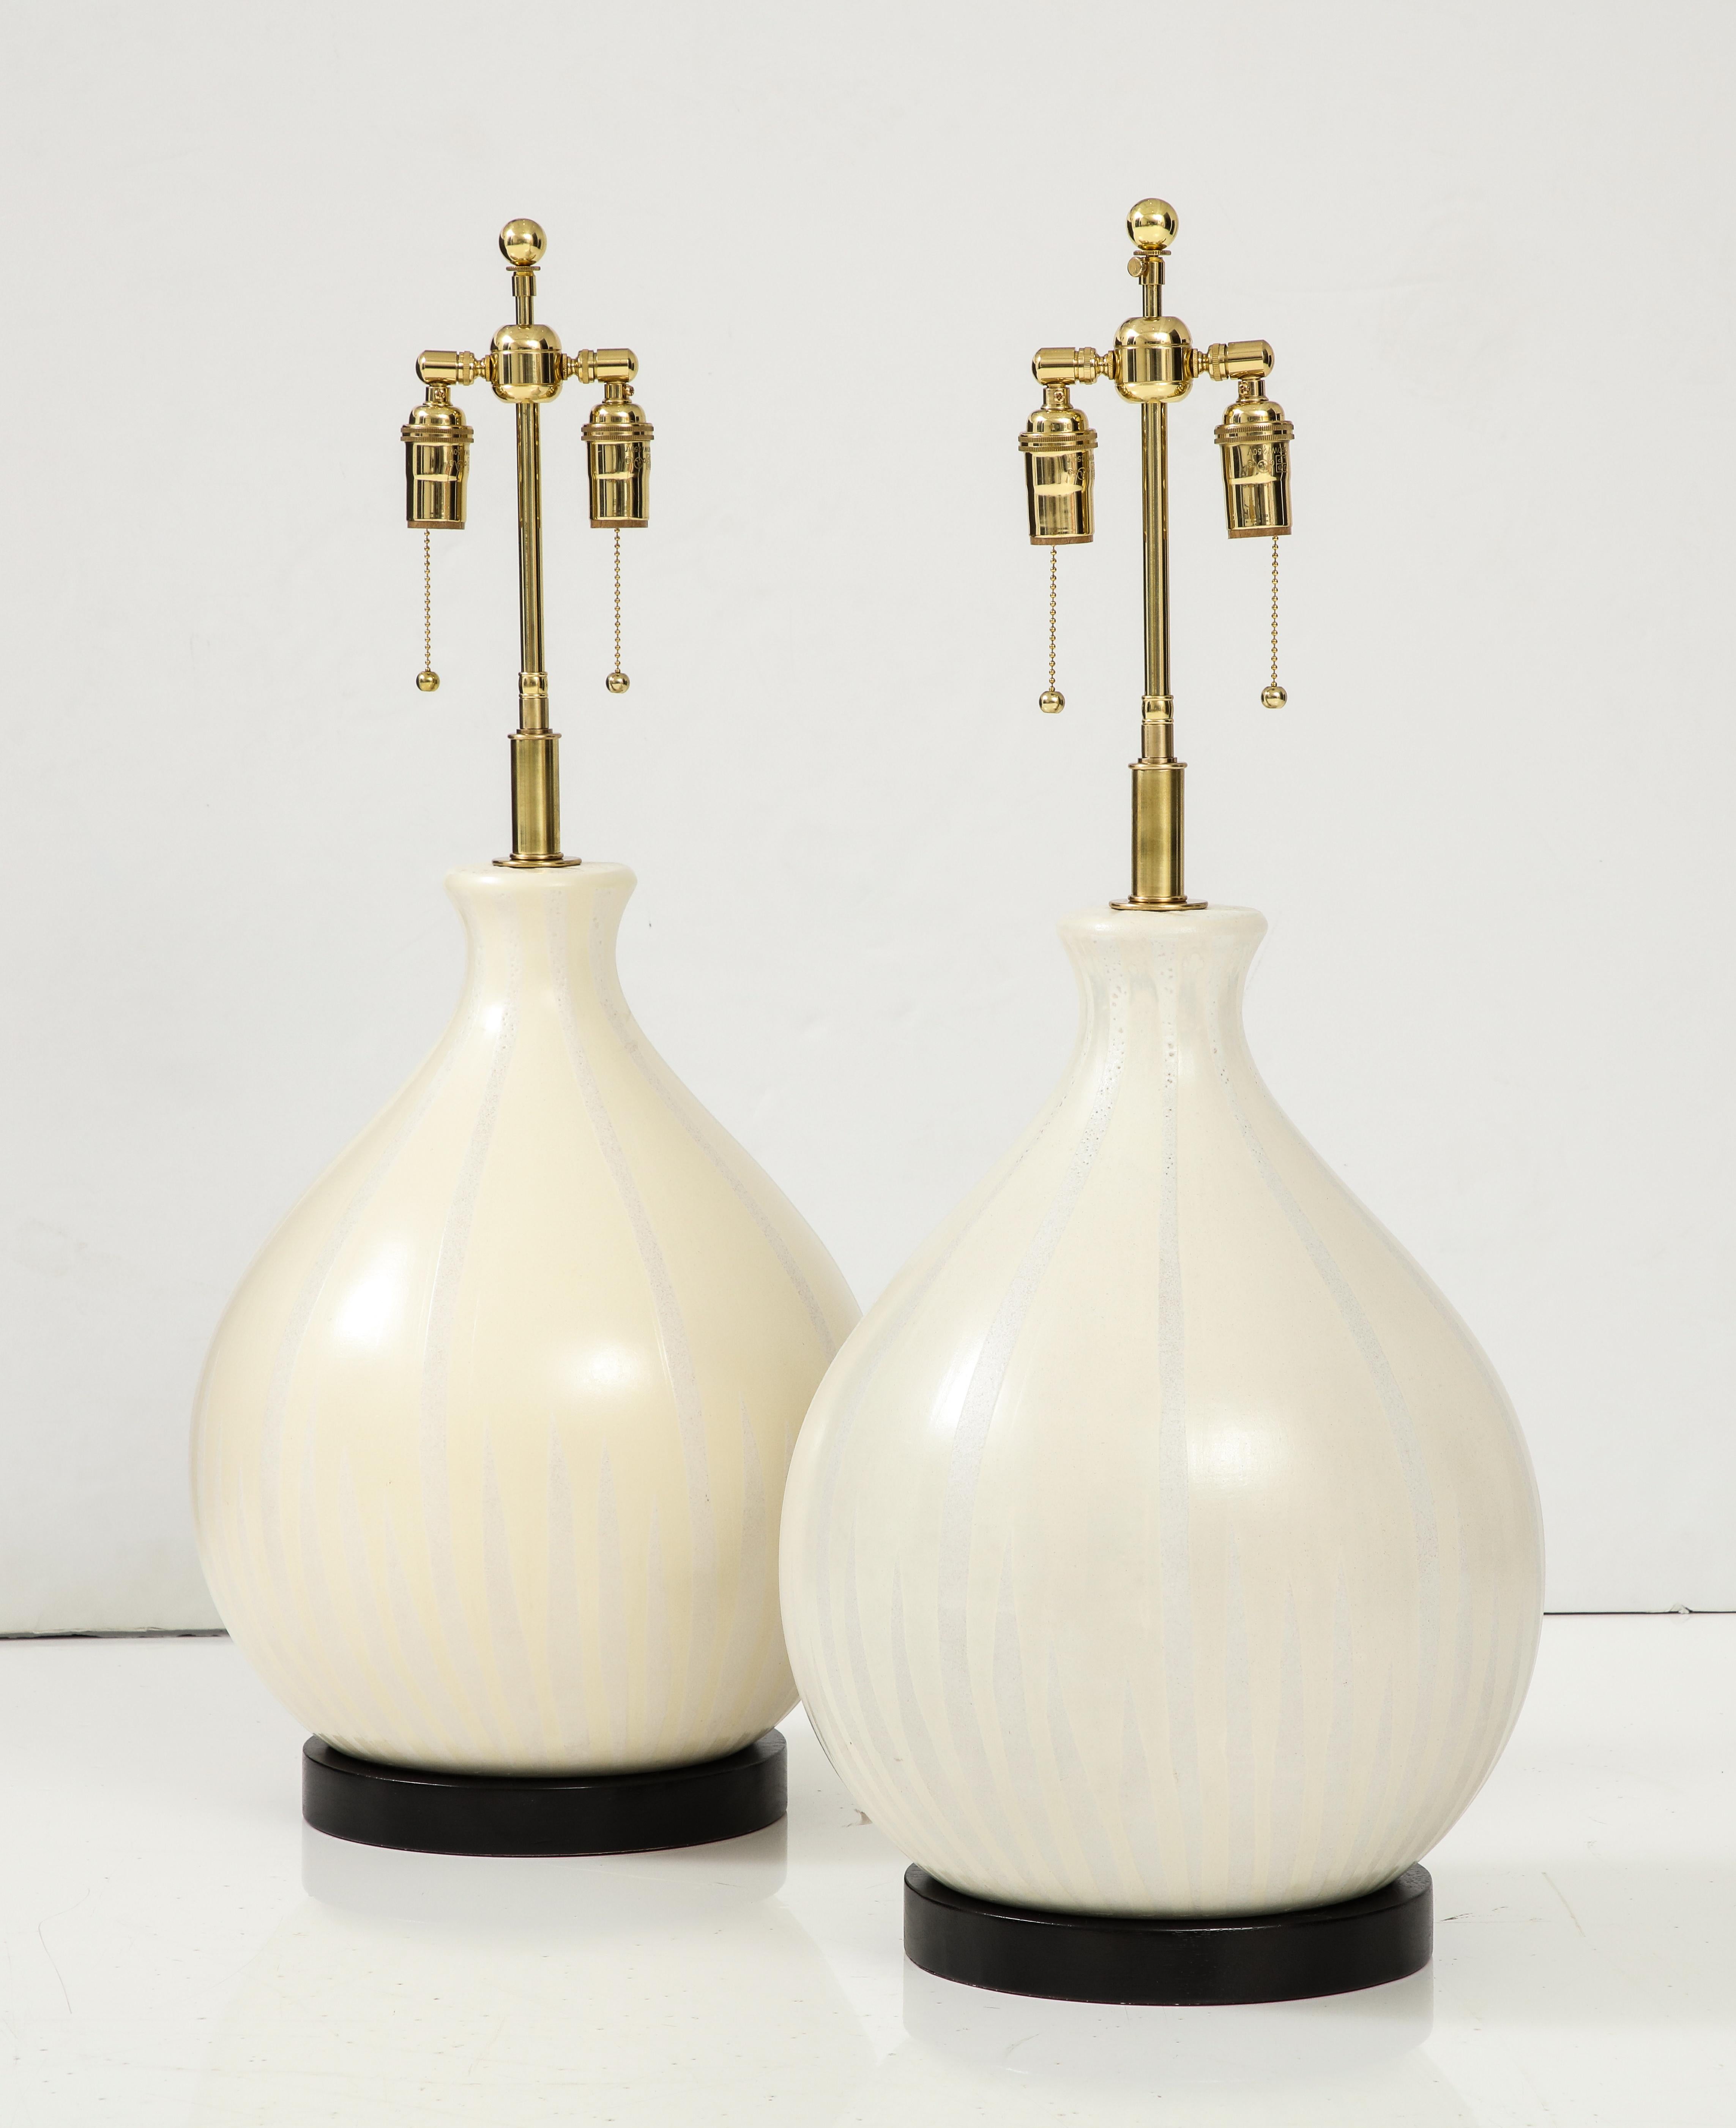 Wonderful pair of large Mid-Century Modern  balloon shaped ceramic lamps.
The Ivory glazed ceramic lamp bodies have a striped pattern and sit on black finished wooden bases.
They have been Newly rewired with adjustable Brass double clusters that